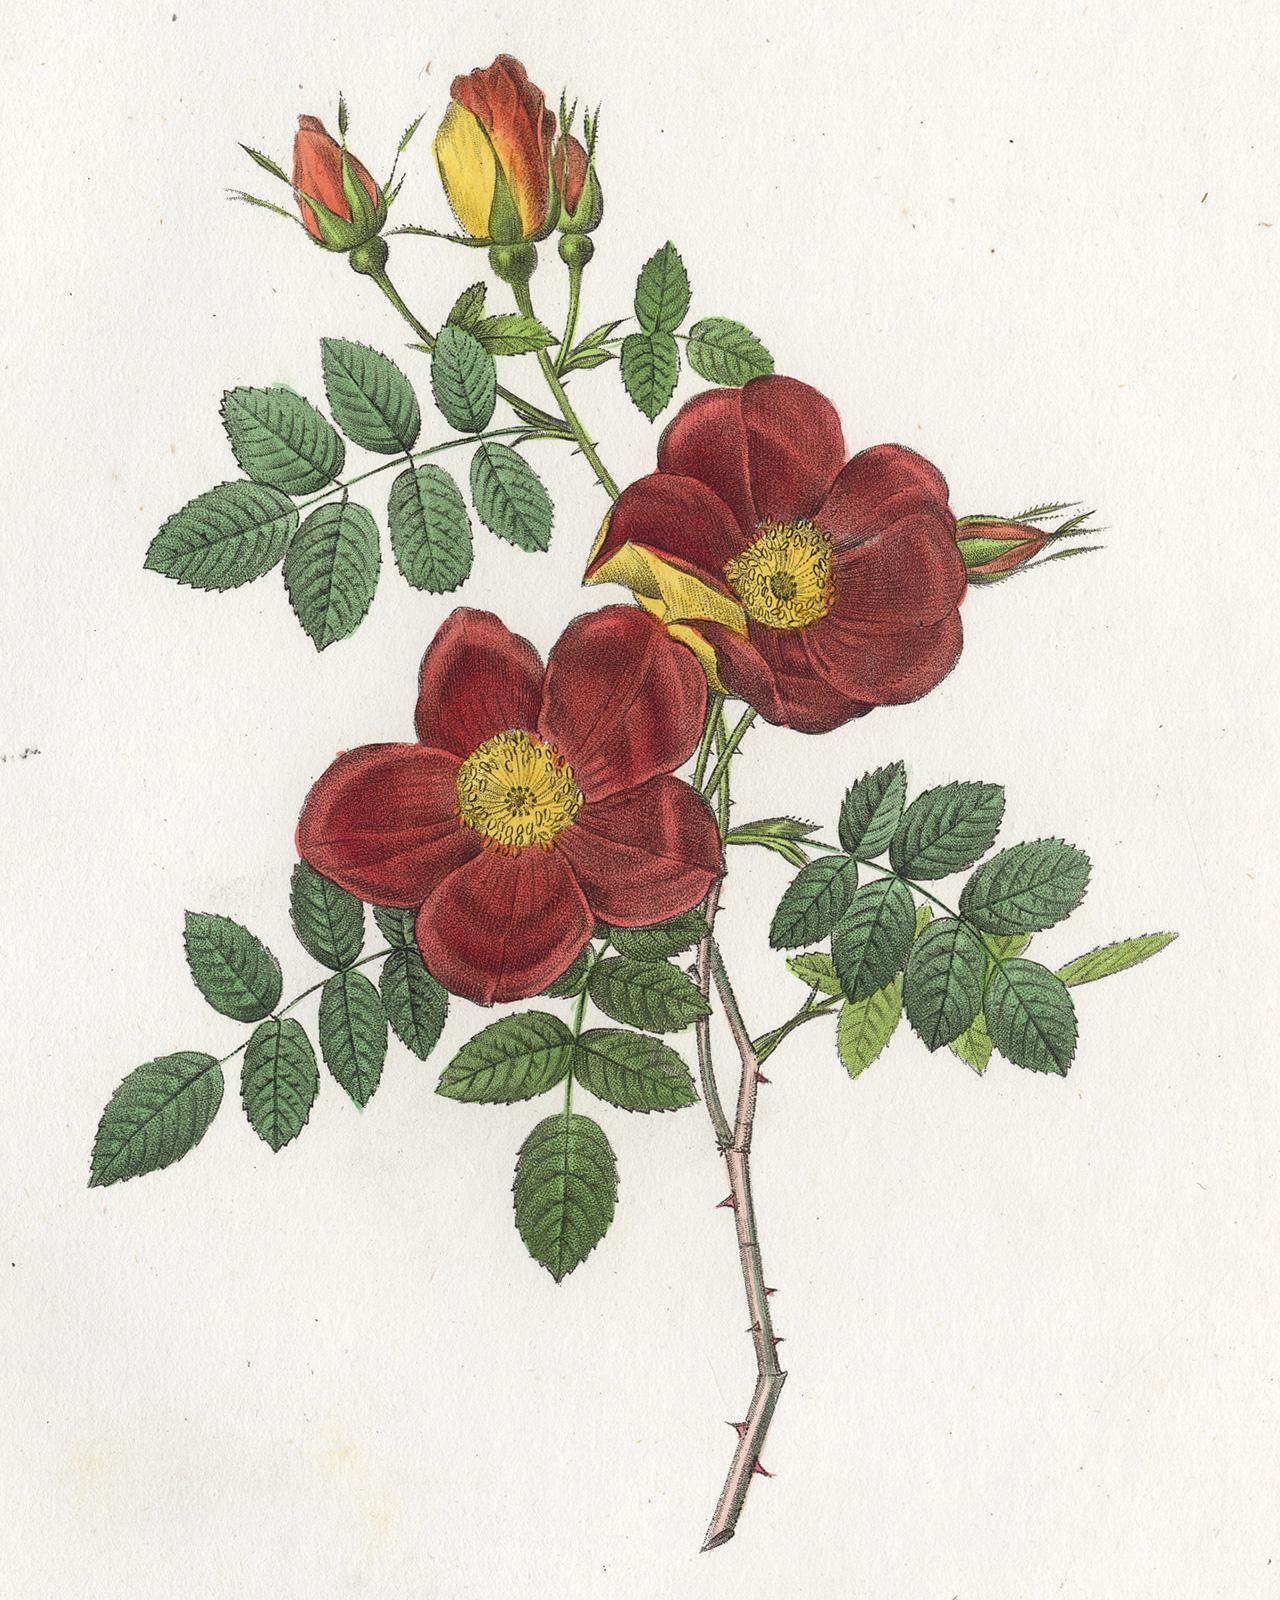 Austrian Copper Rose by Redoute - Les Roses - Handcoloured engraving - 19th c. - Print by Pierre-Joseph Redouté